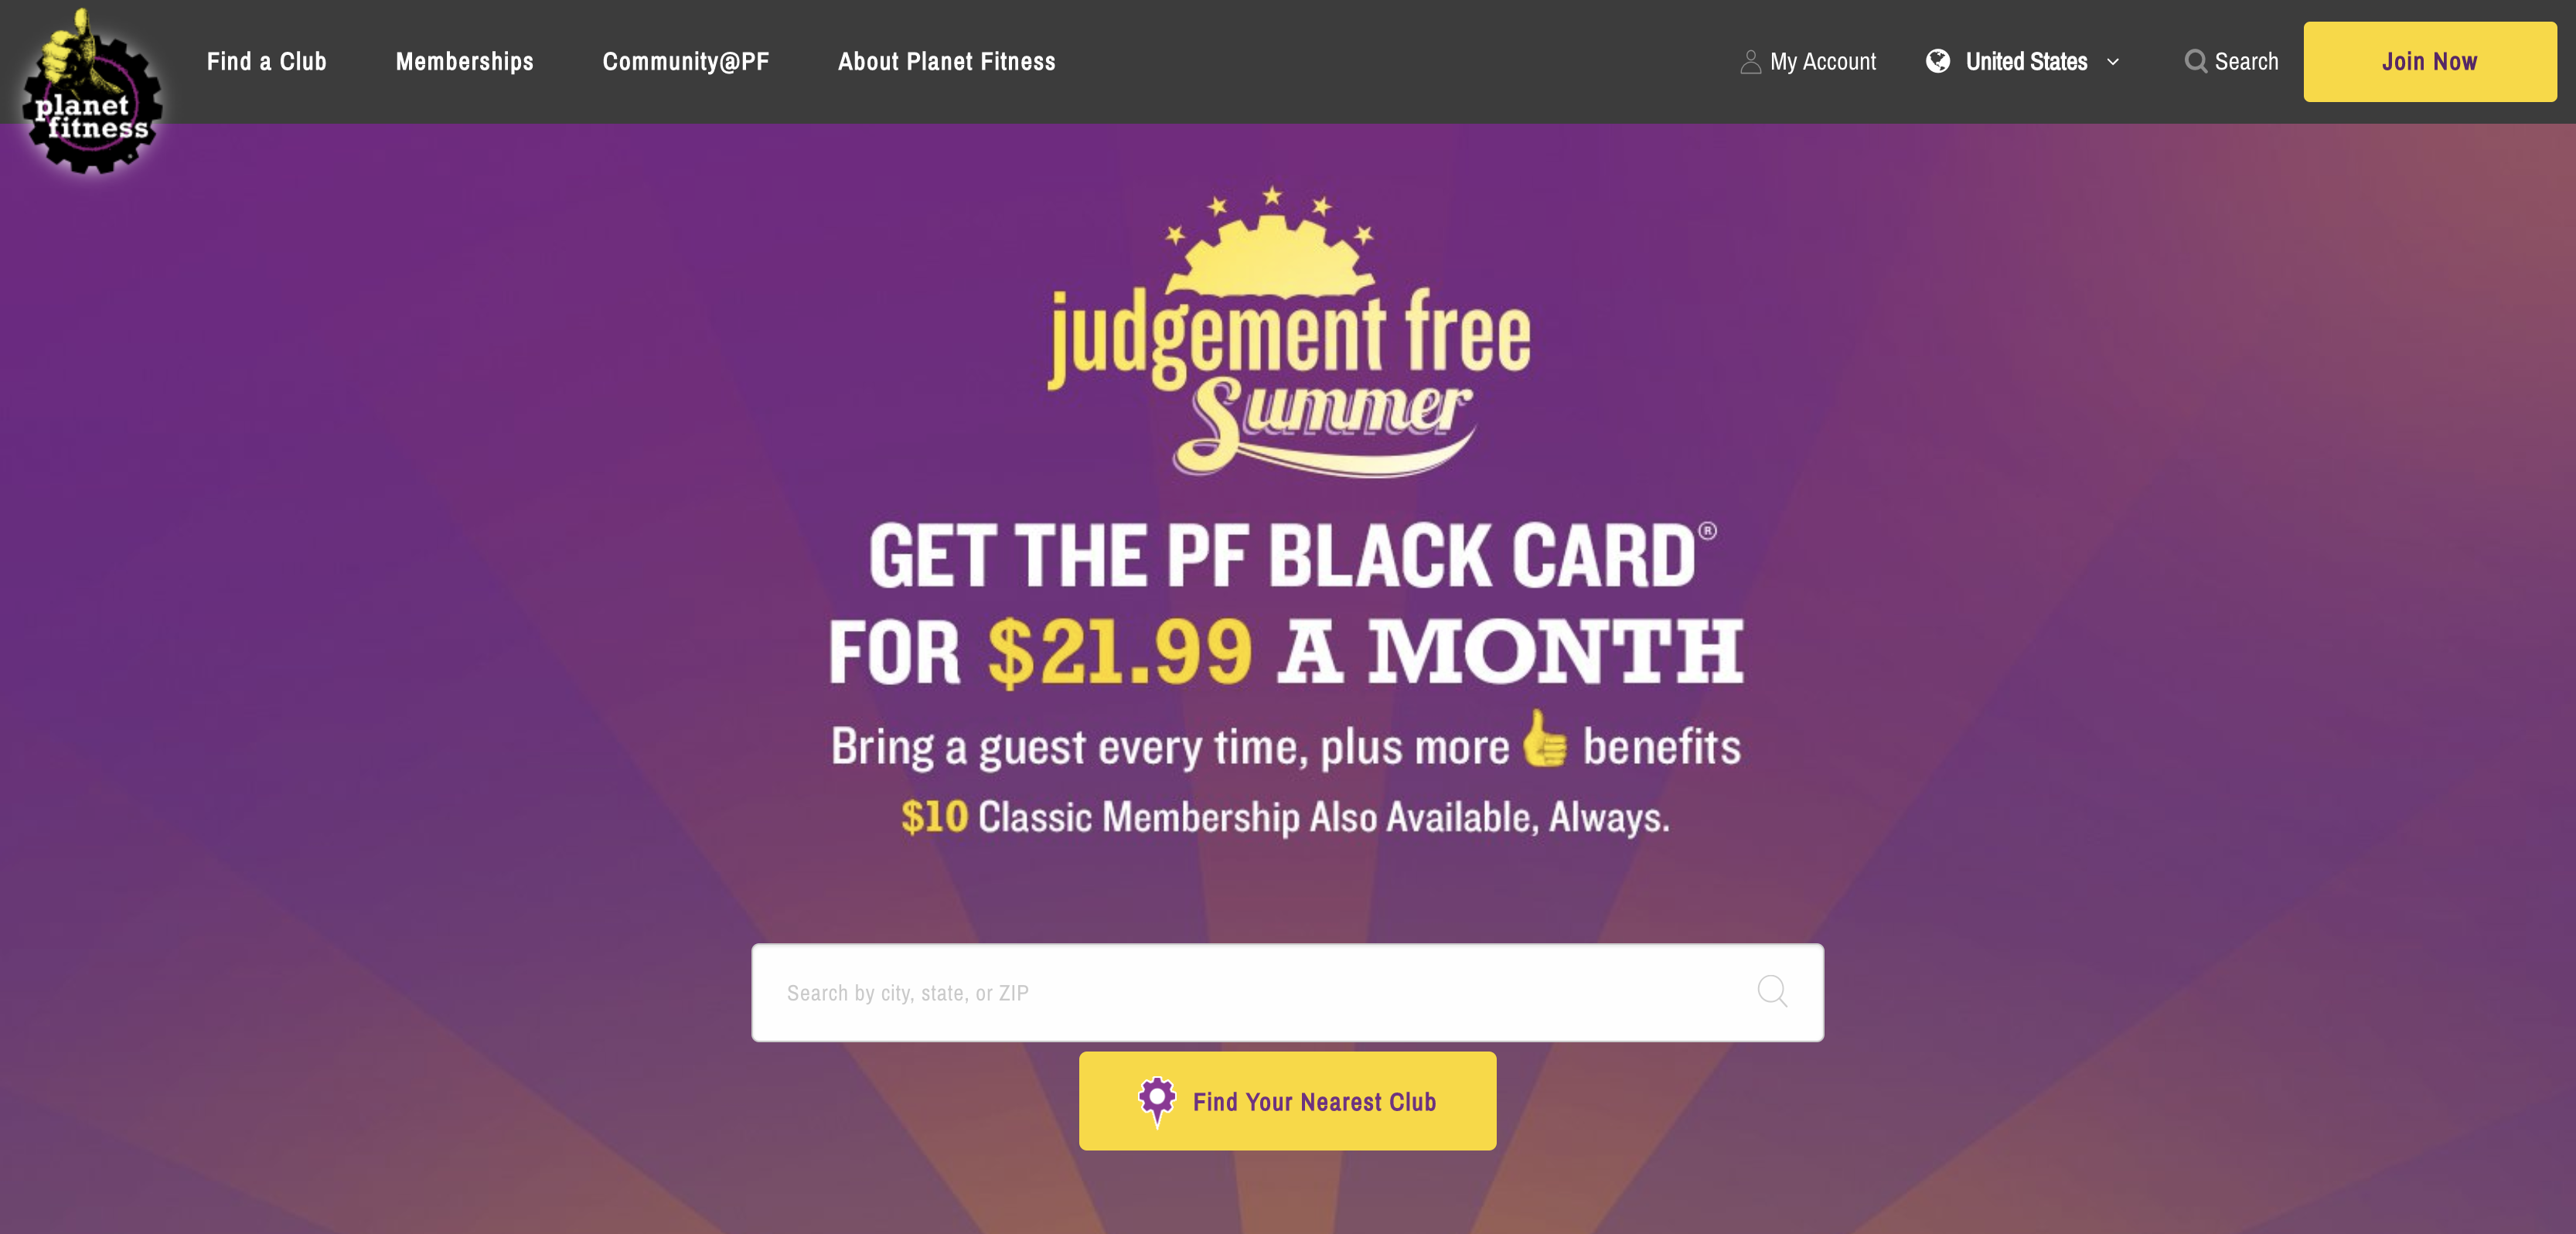 Planet Fitness A Lazy Coder S Way Of Verifying Premium Access